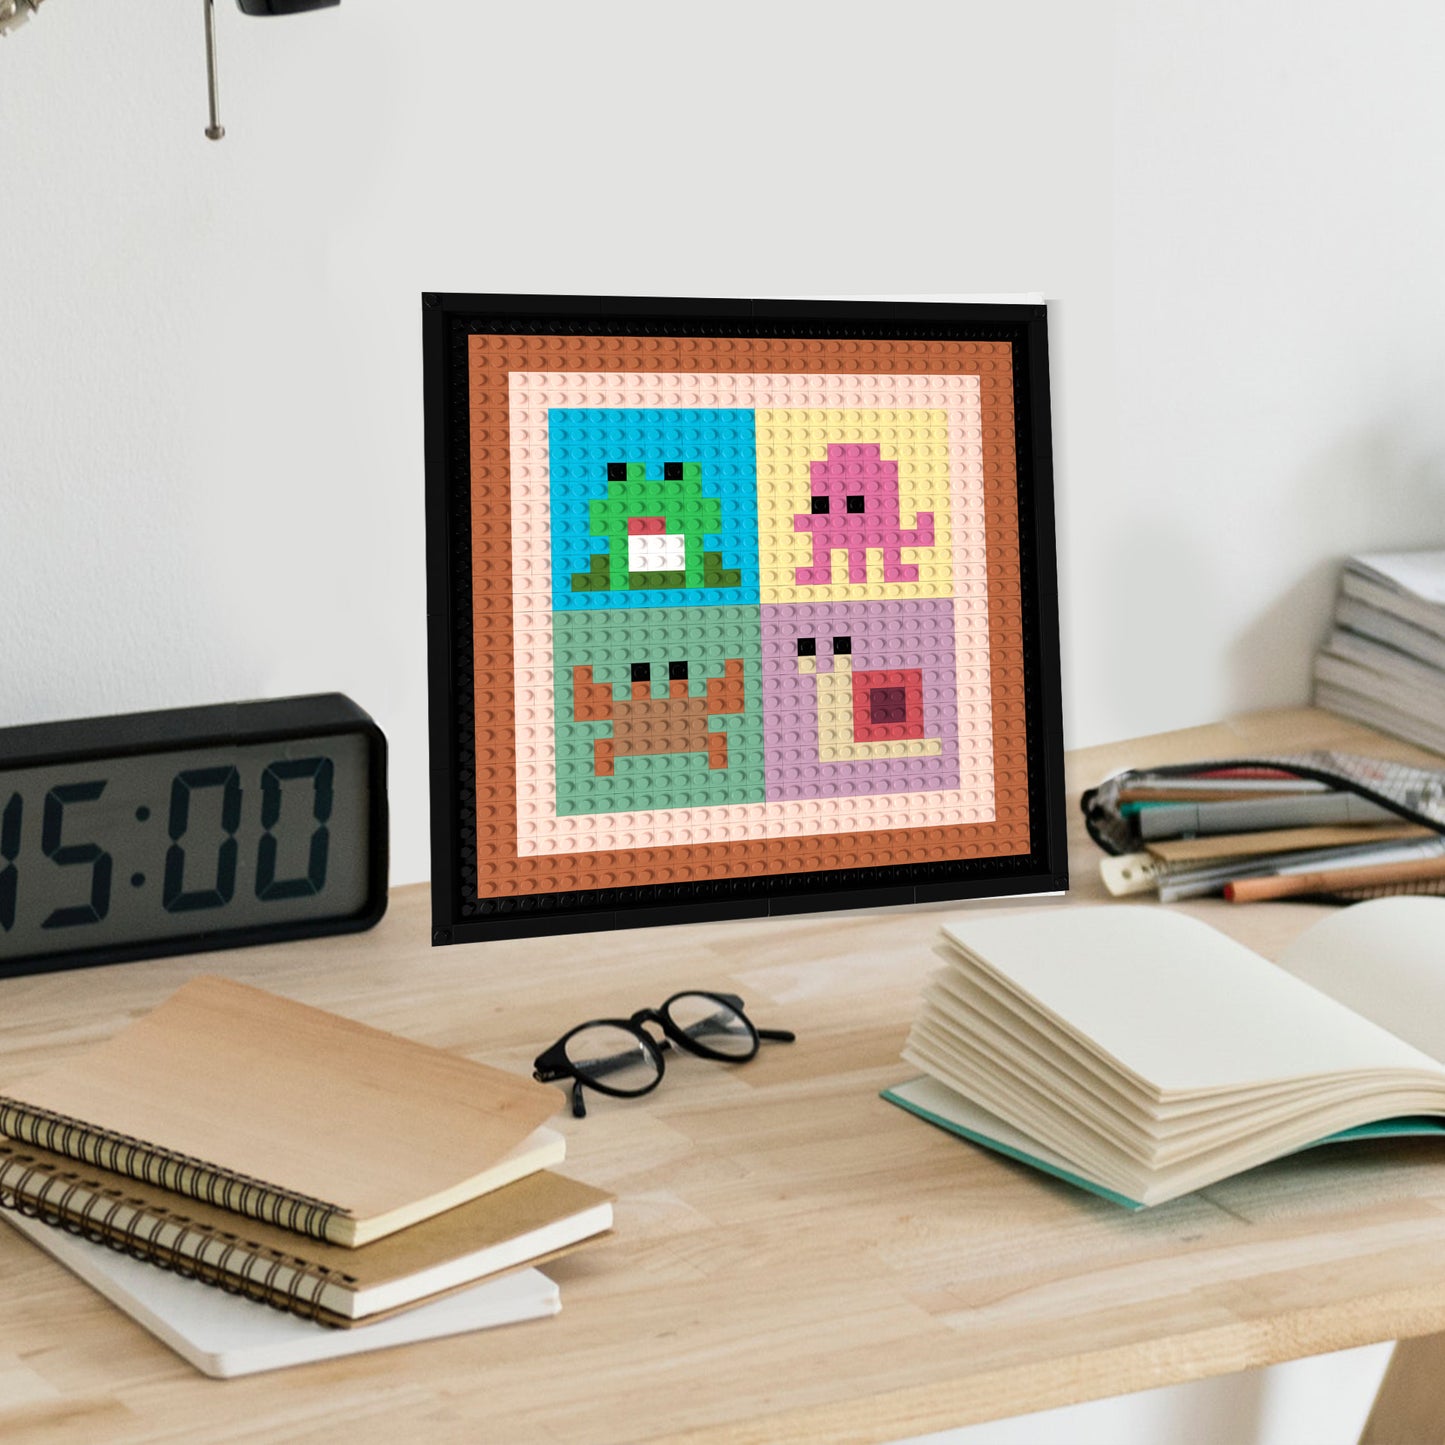 32*32 Compatible Lego Pieces "Four Abstract Cute Little Animals" Pixel Art